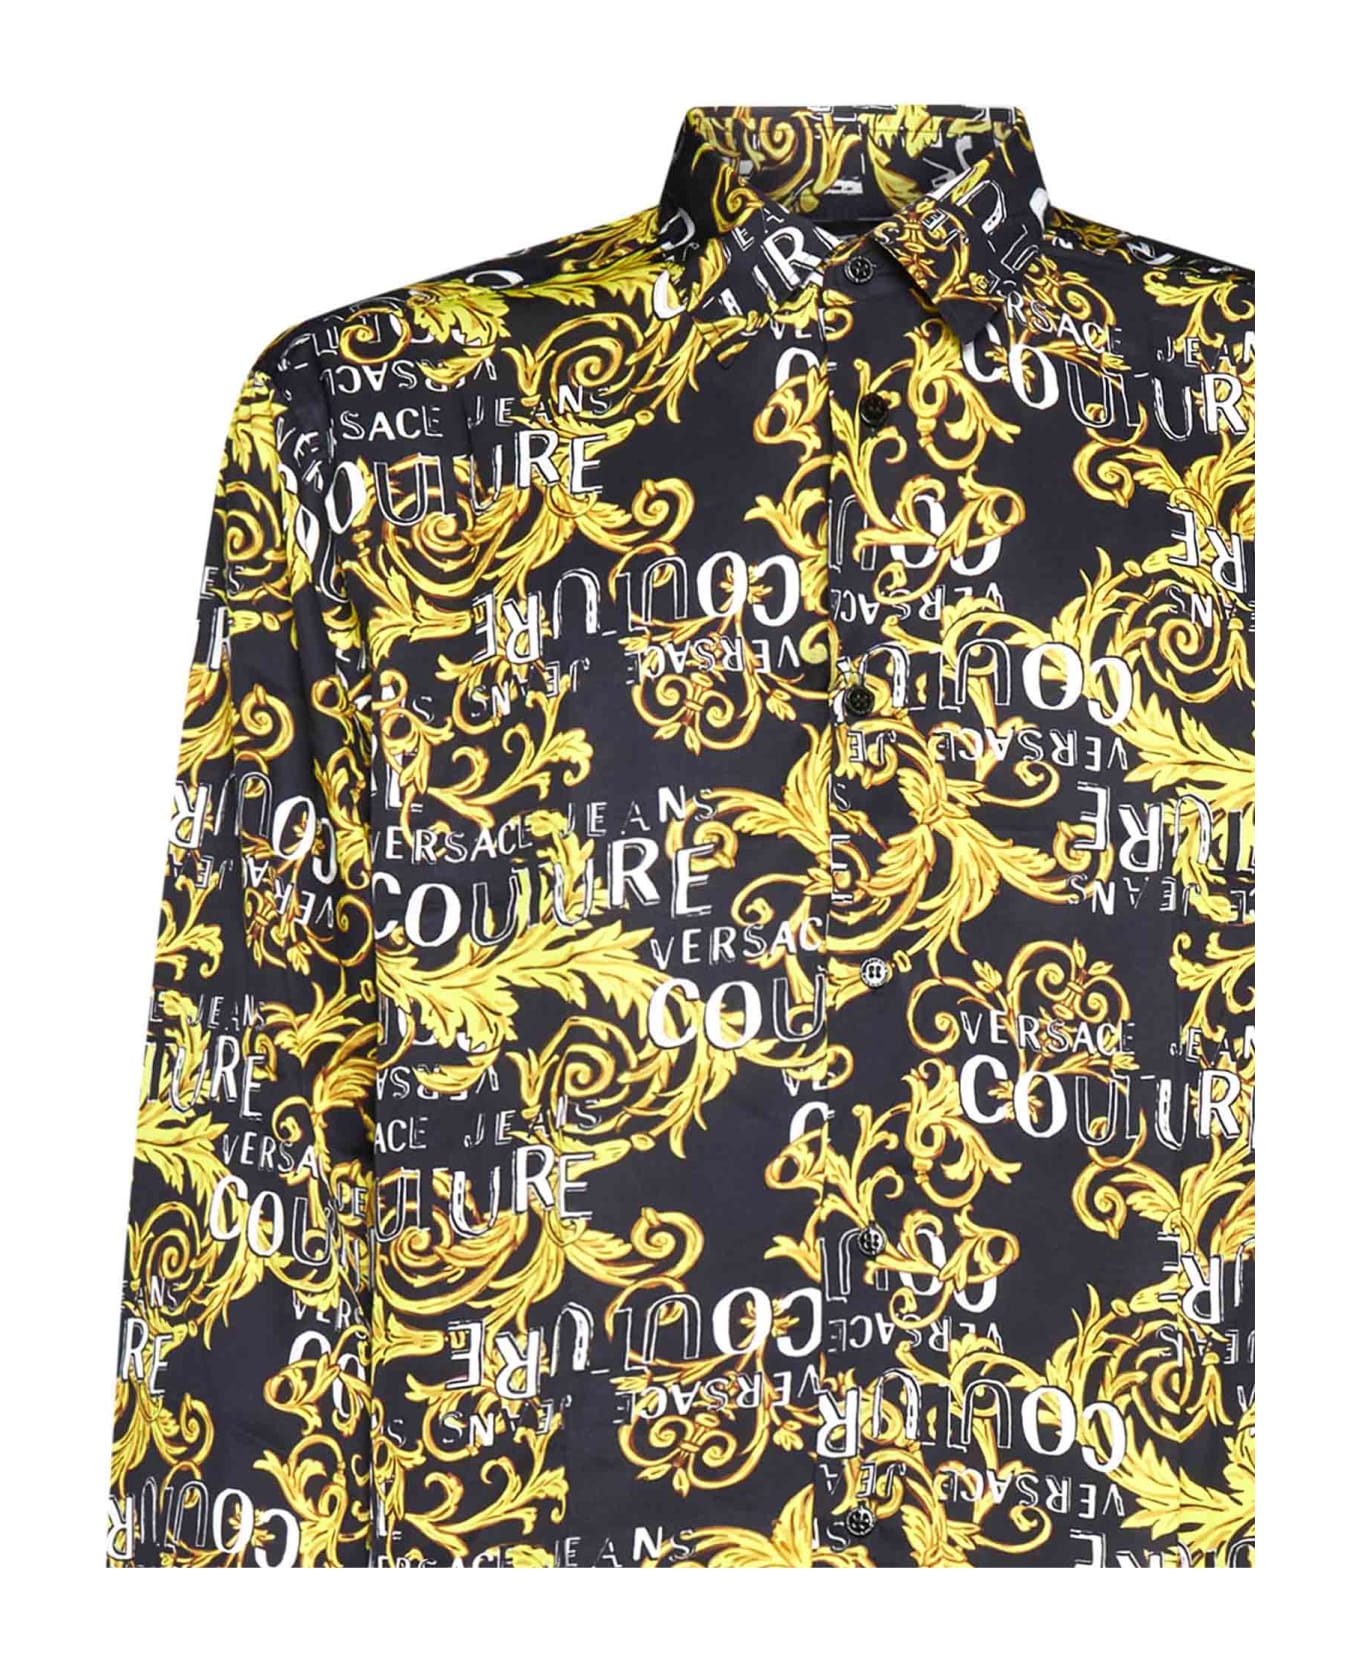 Versace Jeans Couture Shirt - Black gold